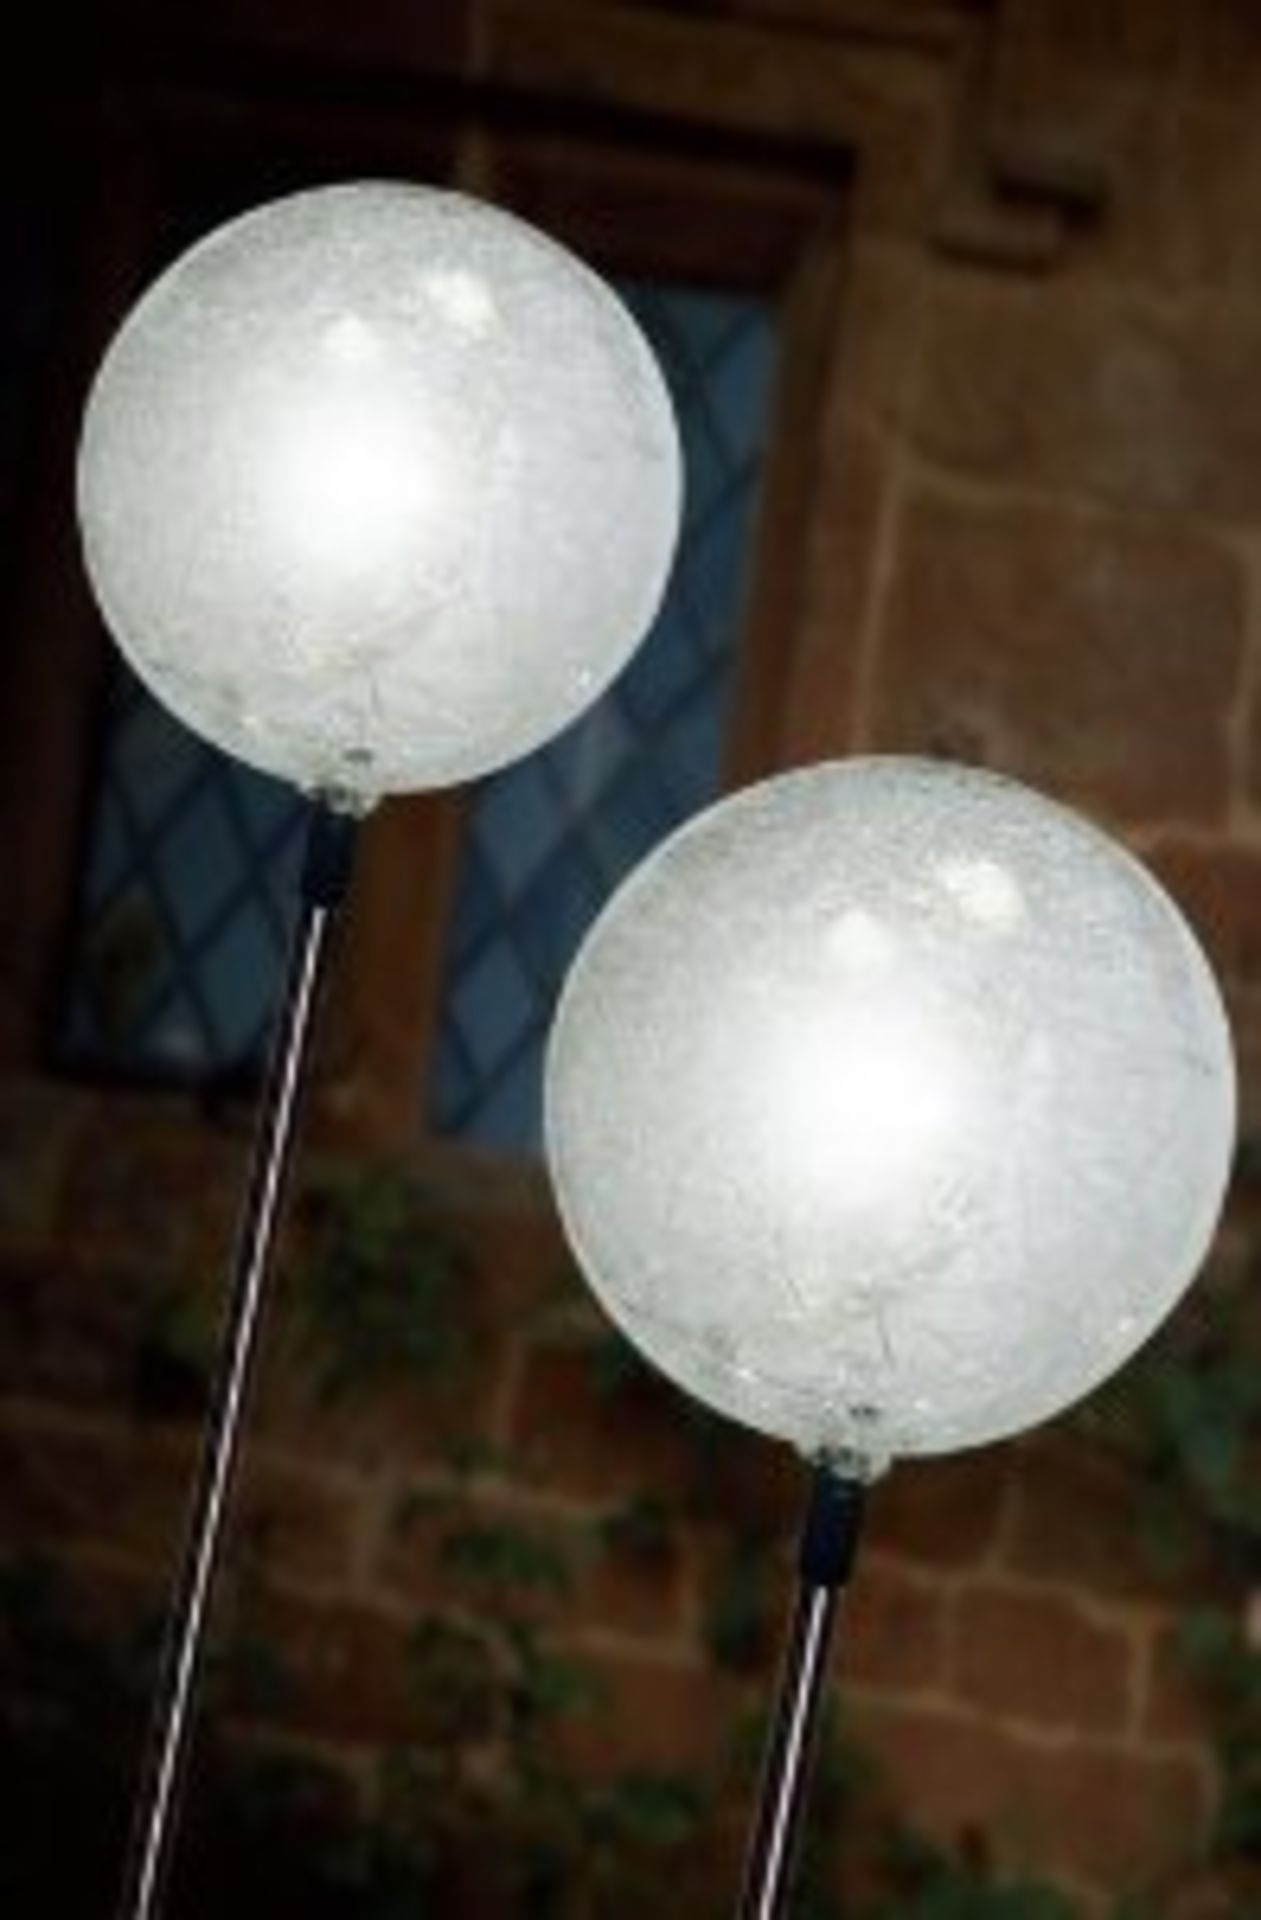 V *TRADE QTY* Brand New Pack of Two Contemporary Globe Solar Lights with Crackled glass design on